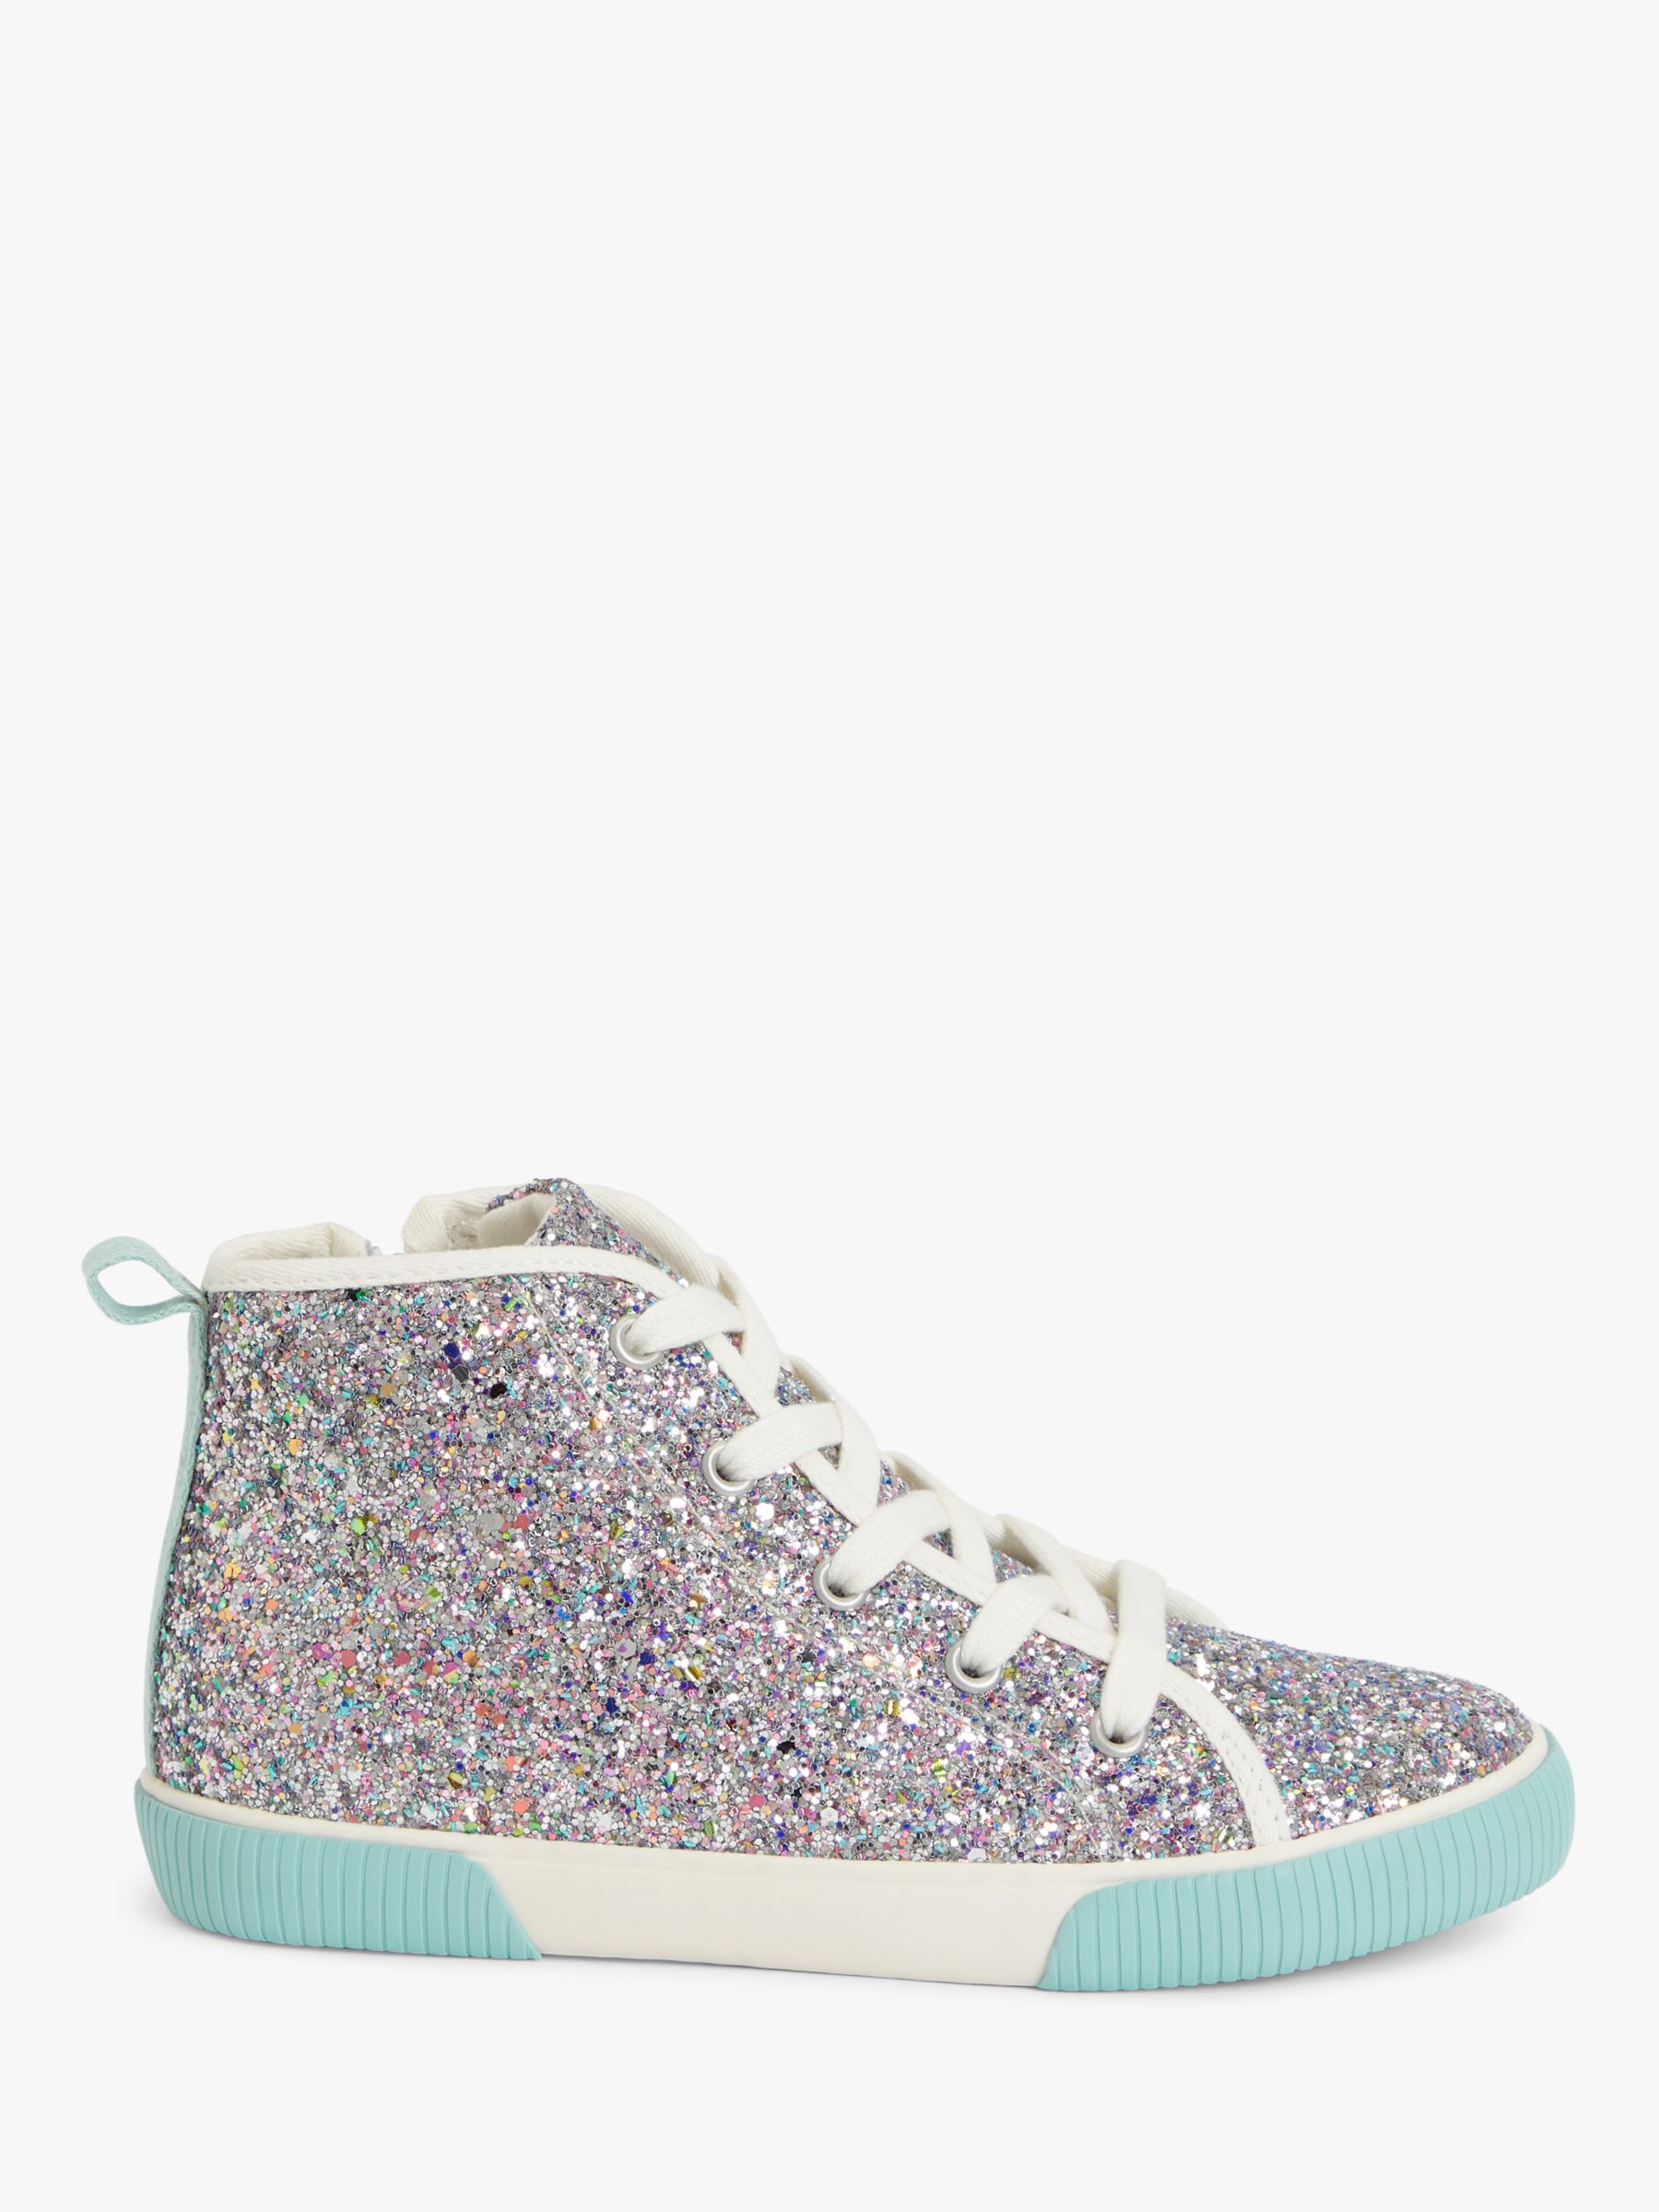 John Lewis & Partners Children's Bella High Top Trainers Turquoise Glitter 10 Jnr unisex Upper: synthetic, Sole: rubber